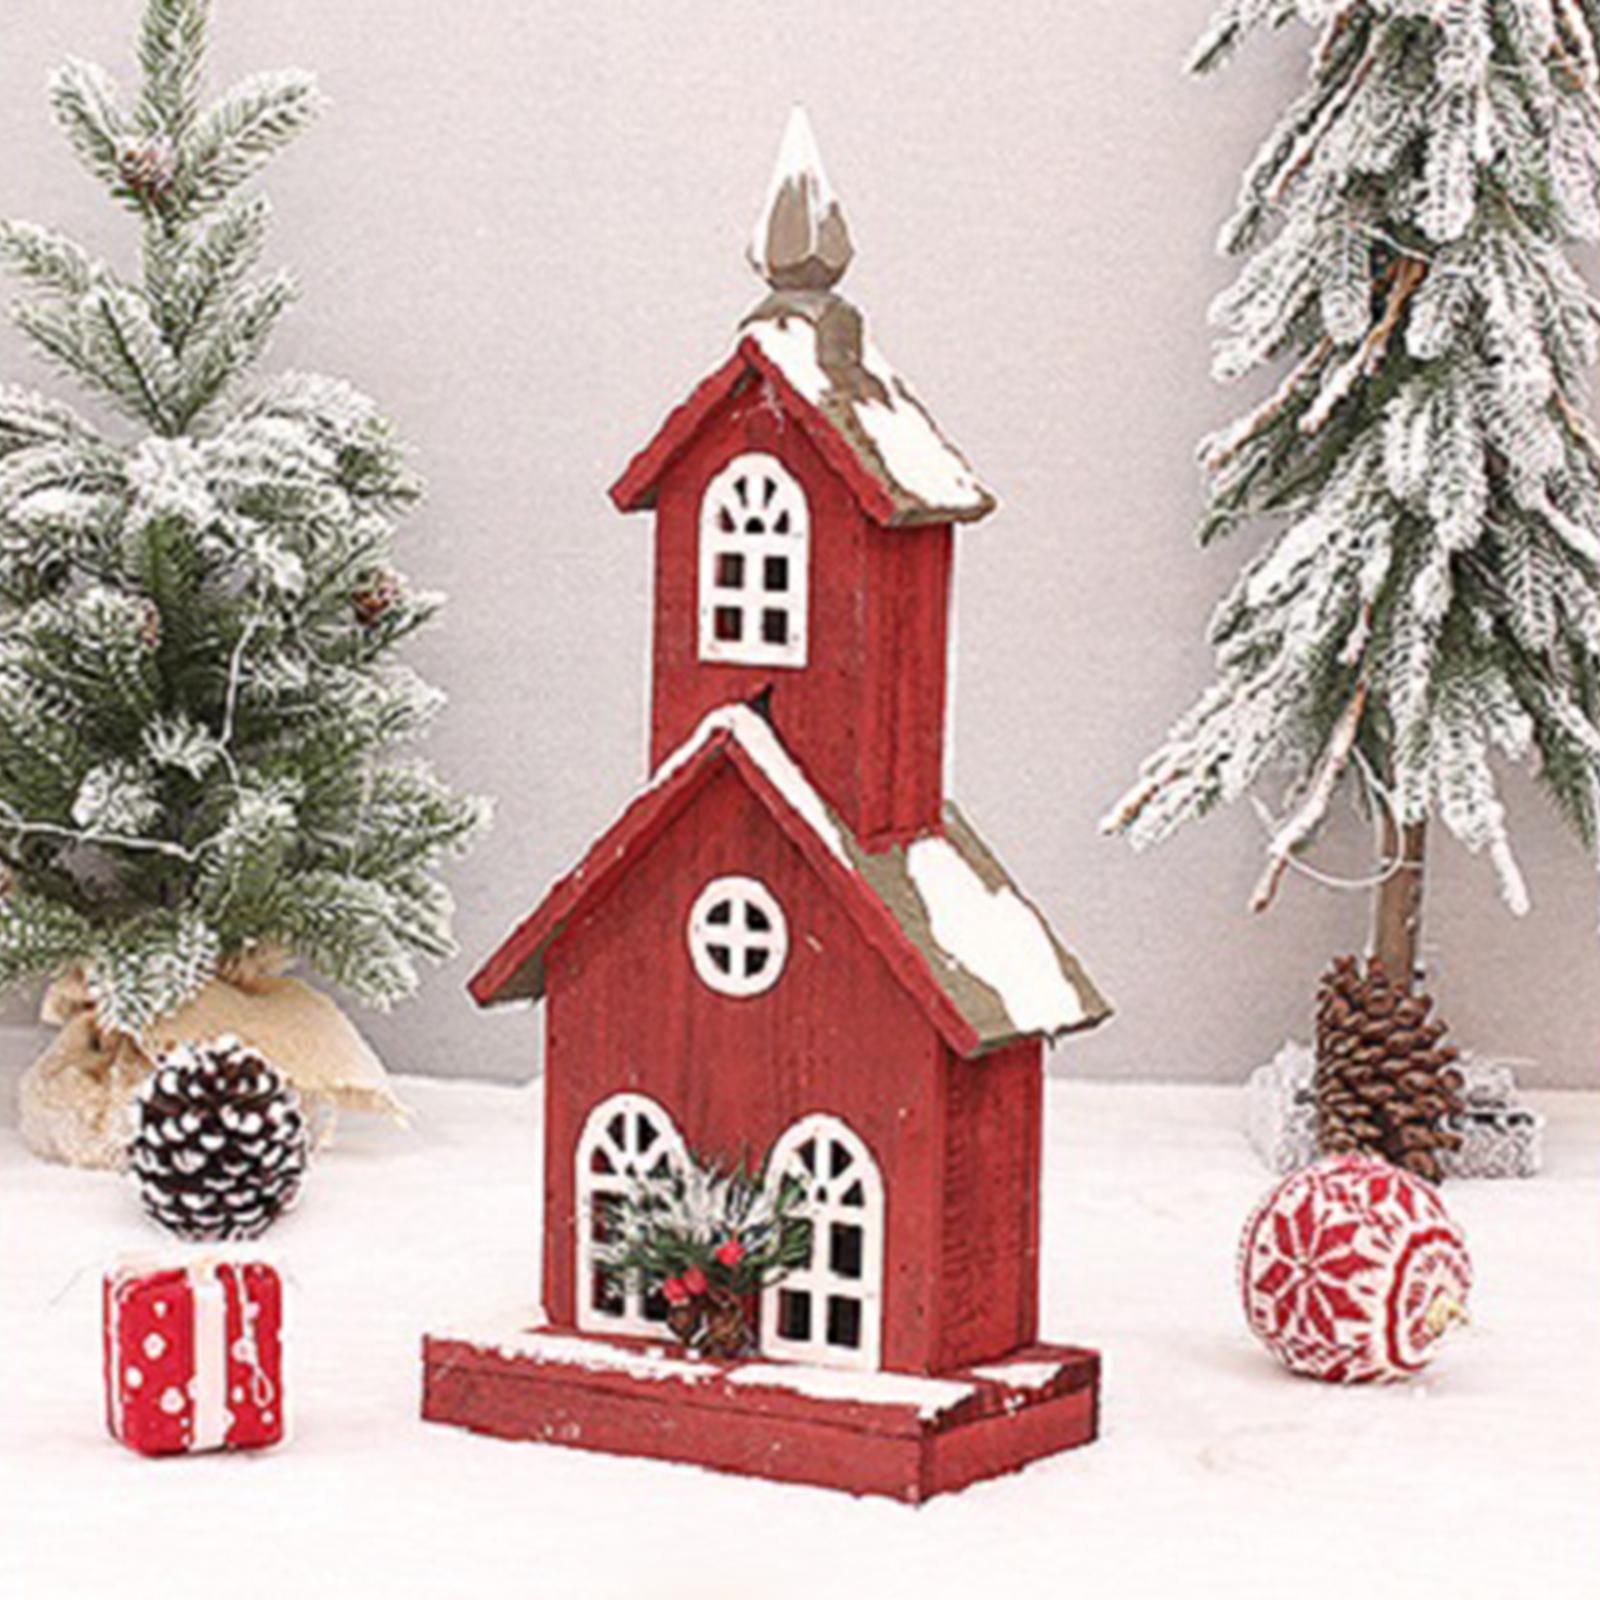 Village House Christmas LED Lights Buildings Room Battery Operated Figurines StyleC 22x13x49cm